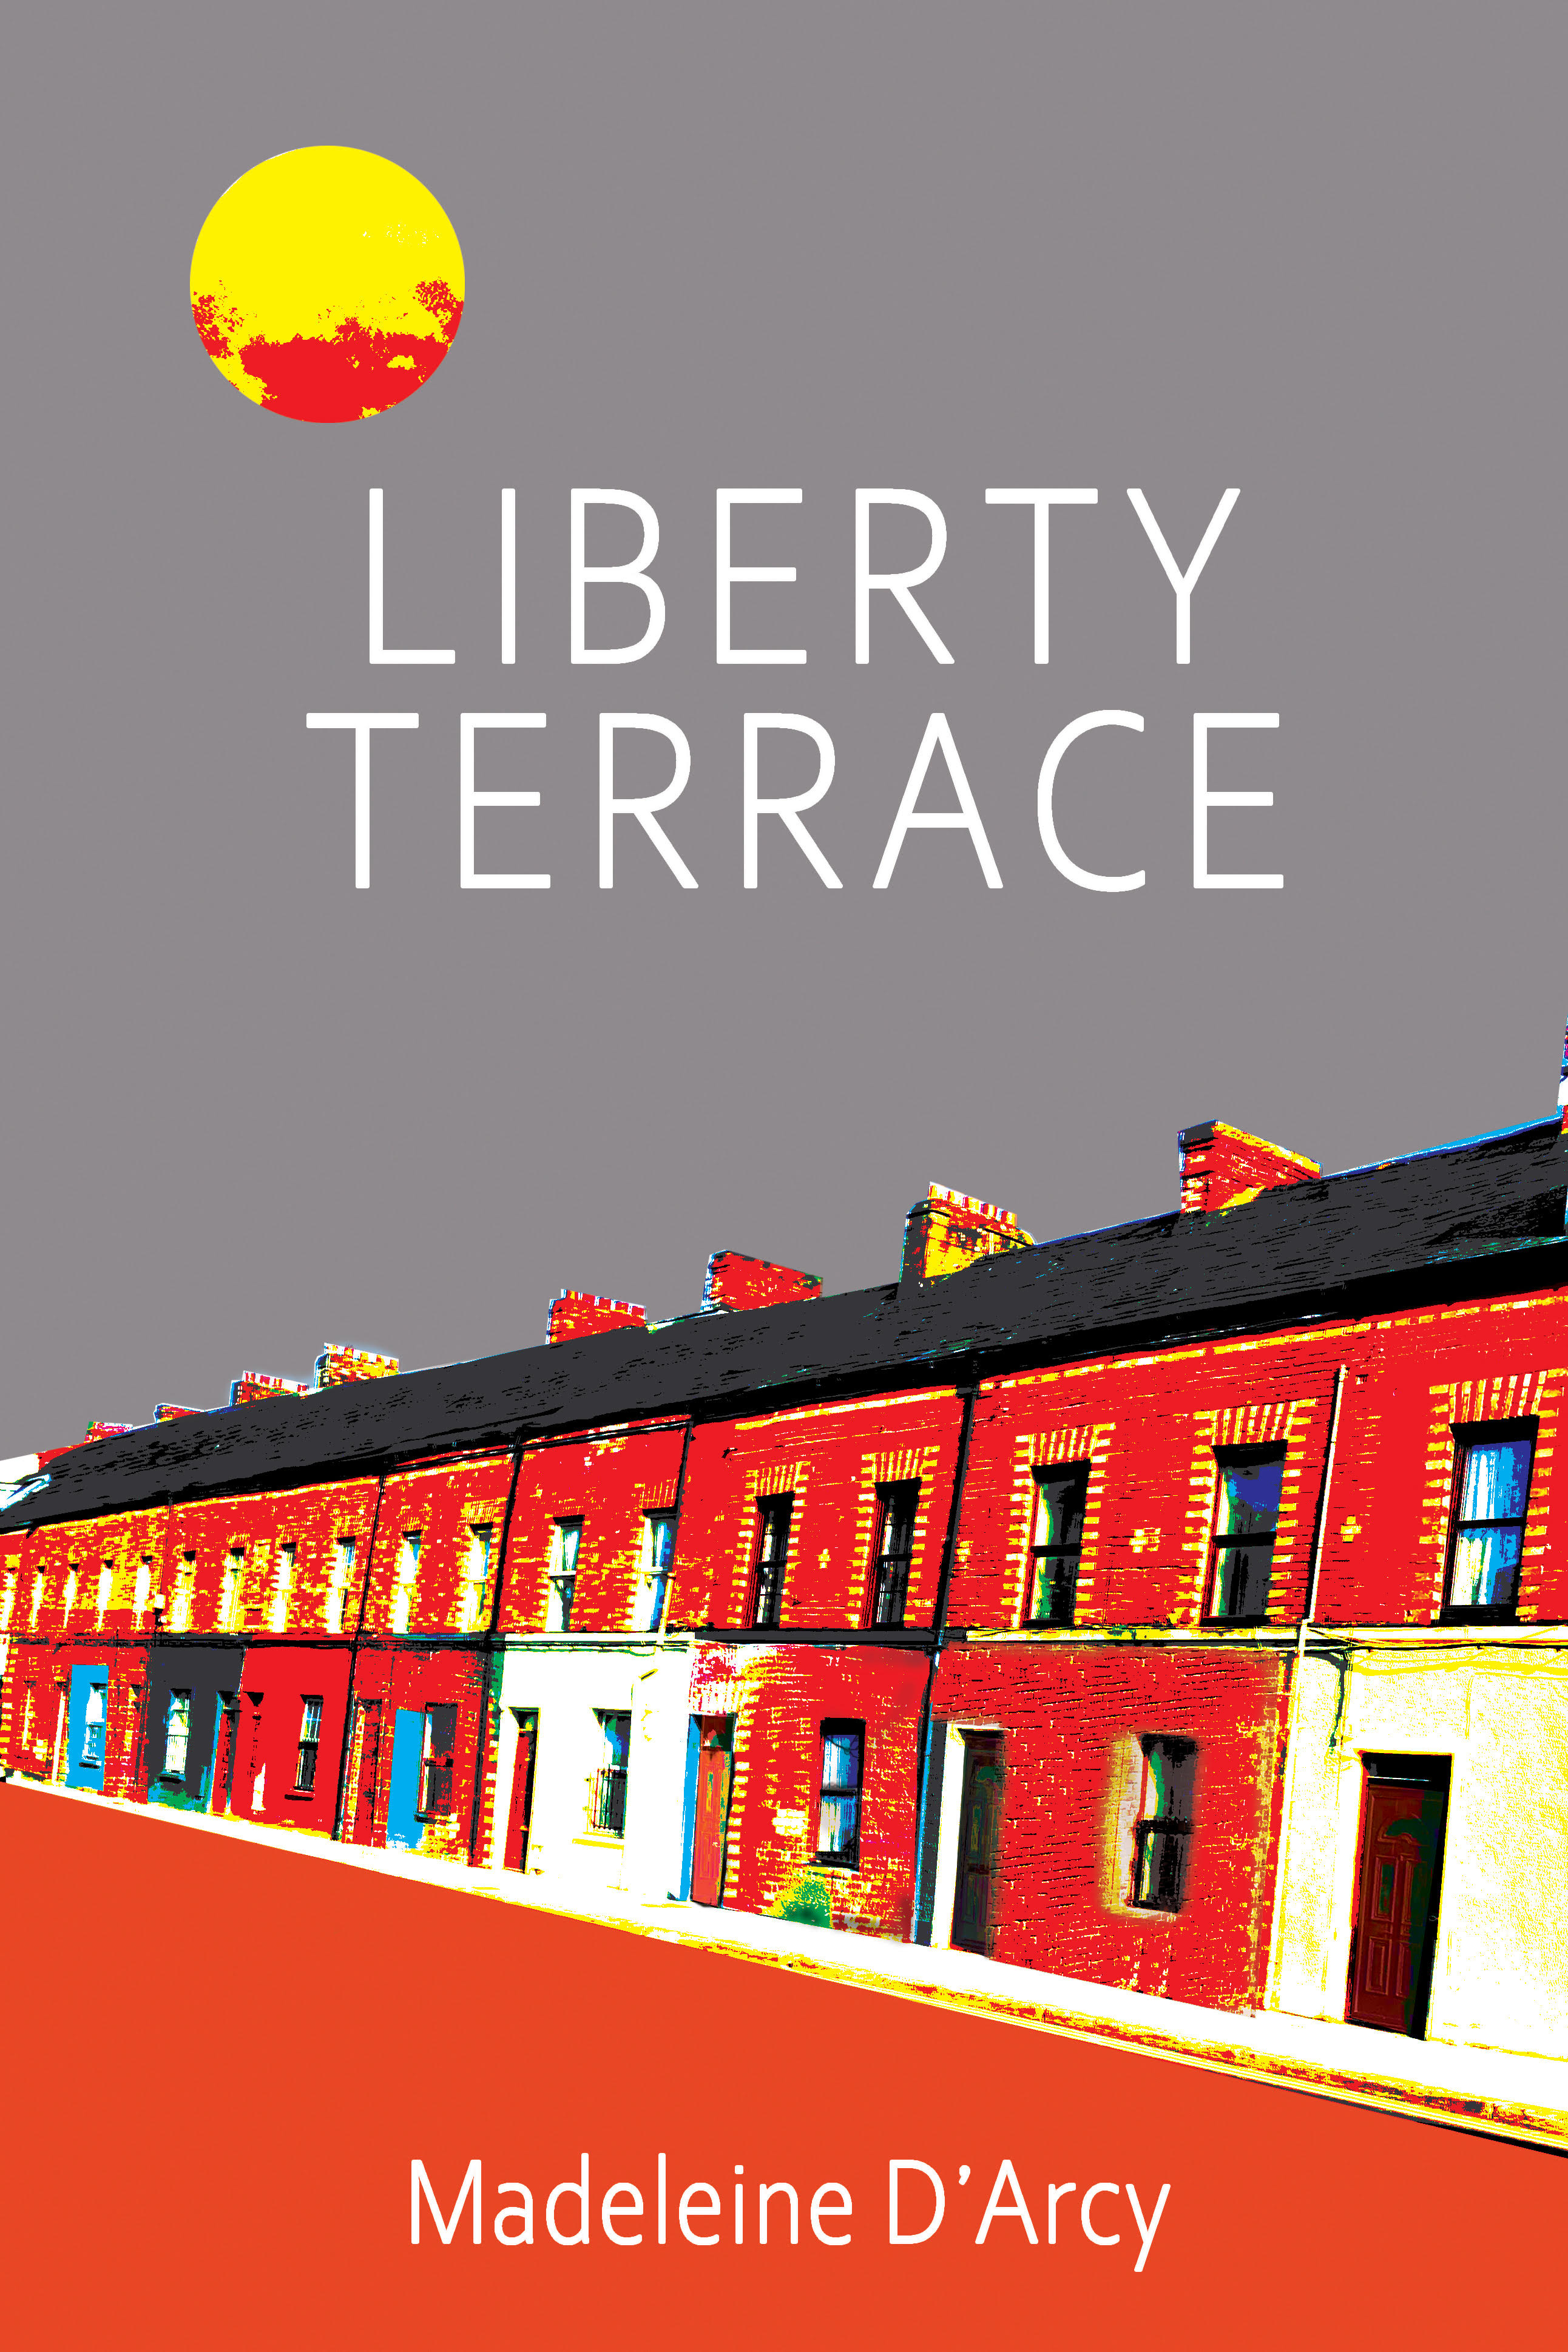 Liberty Terrace shows a row of two-storey house on a street, with a red and yellow globe on top right plus, above the book title are the words "These are fizzing dark comedies with deadly serious intent from a natural storyteller – a fantastic collection.' Kevin Barry. 'A triumph!' Danielle McLaughlin.' "